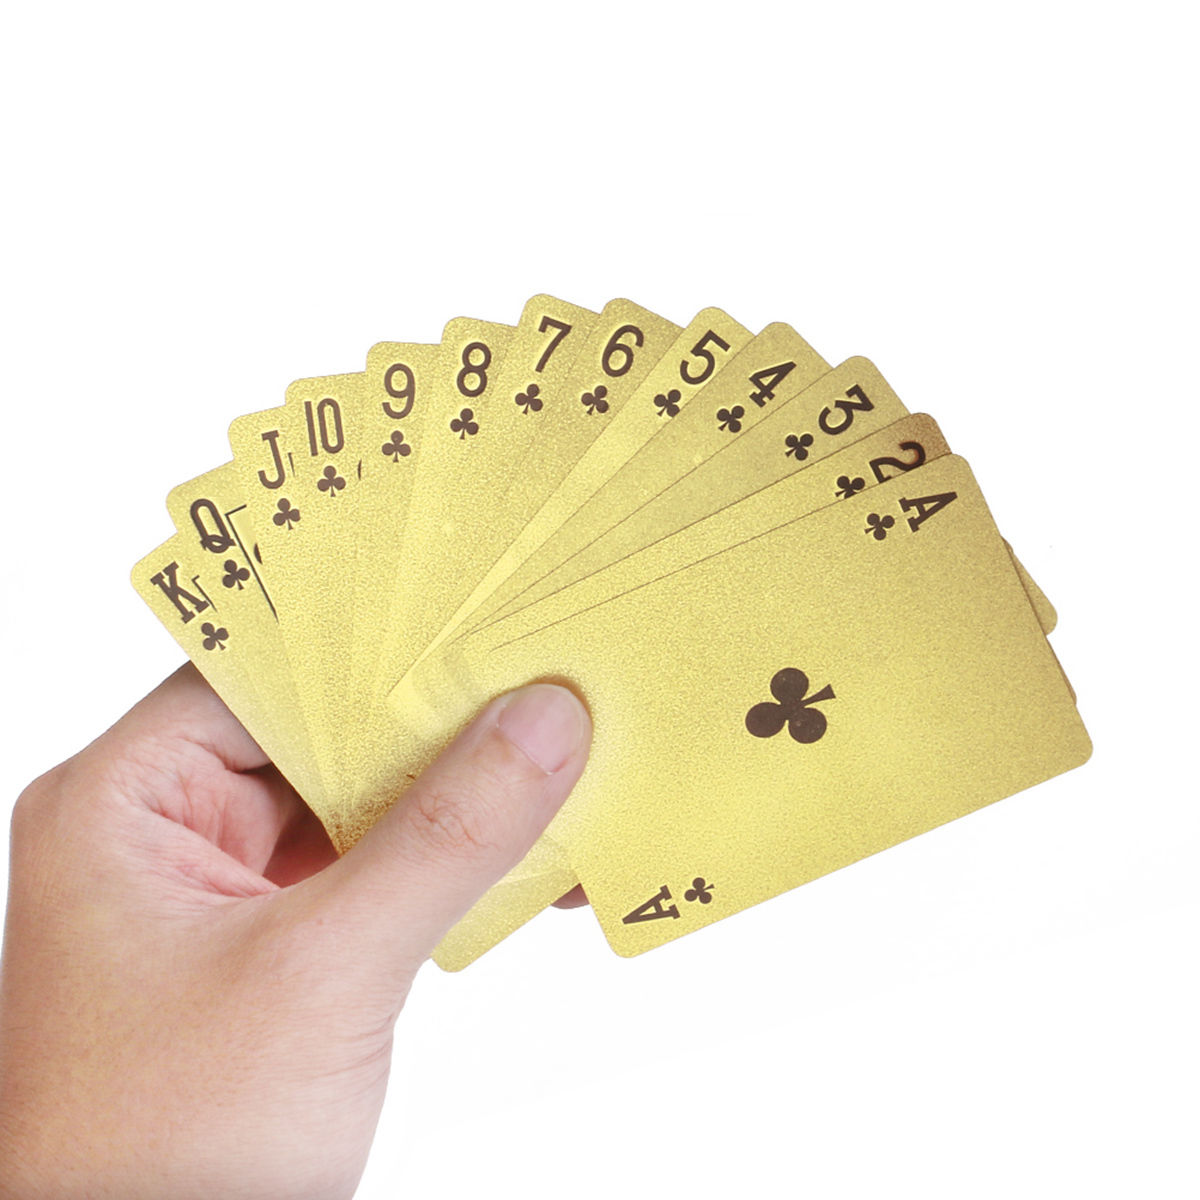 24 Karat Gold Foil Playing Cards 24K Gold and Silver Plated Replica Bills 4